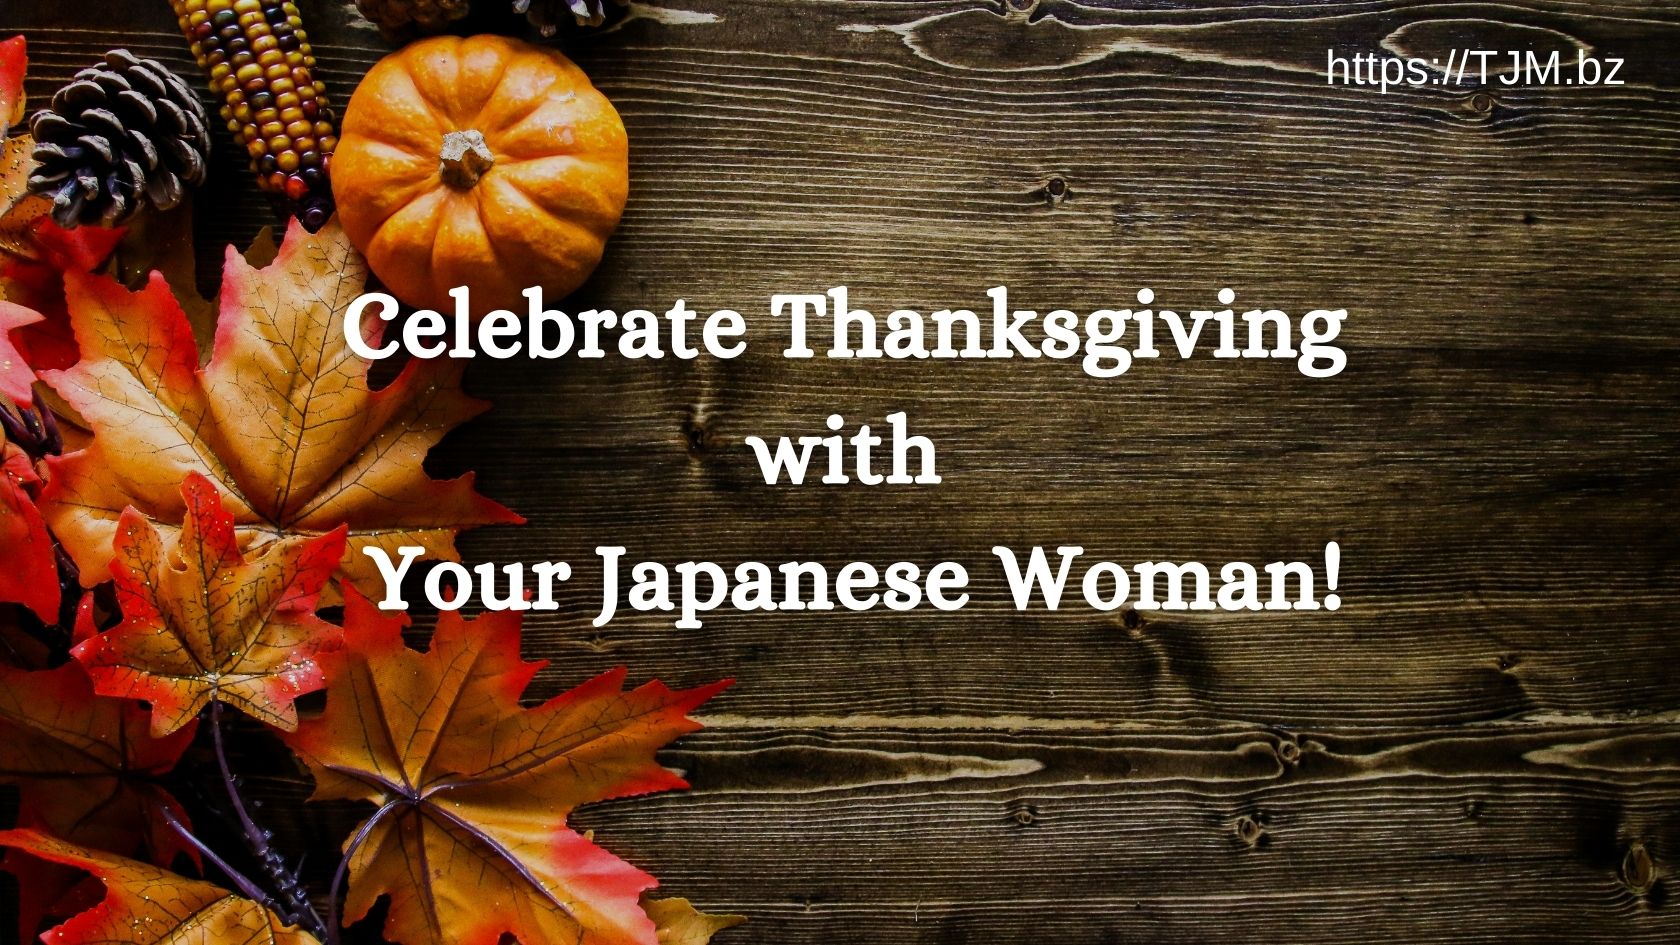 Celebrate Thanksgiving with Your Japanese Woman!